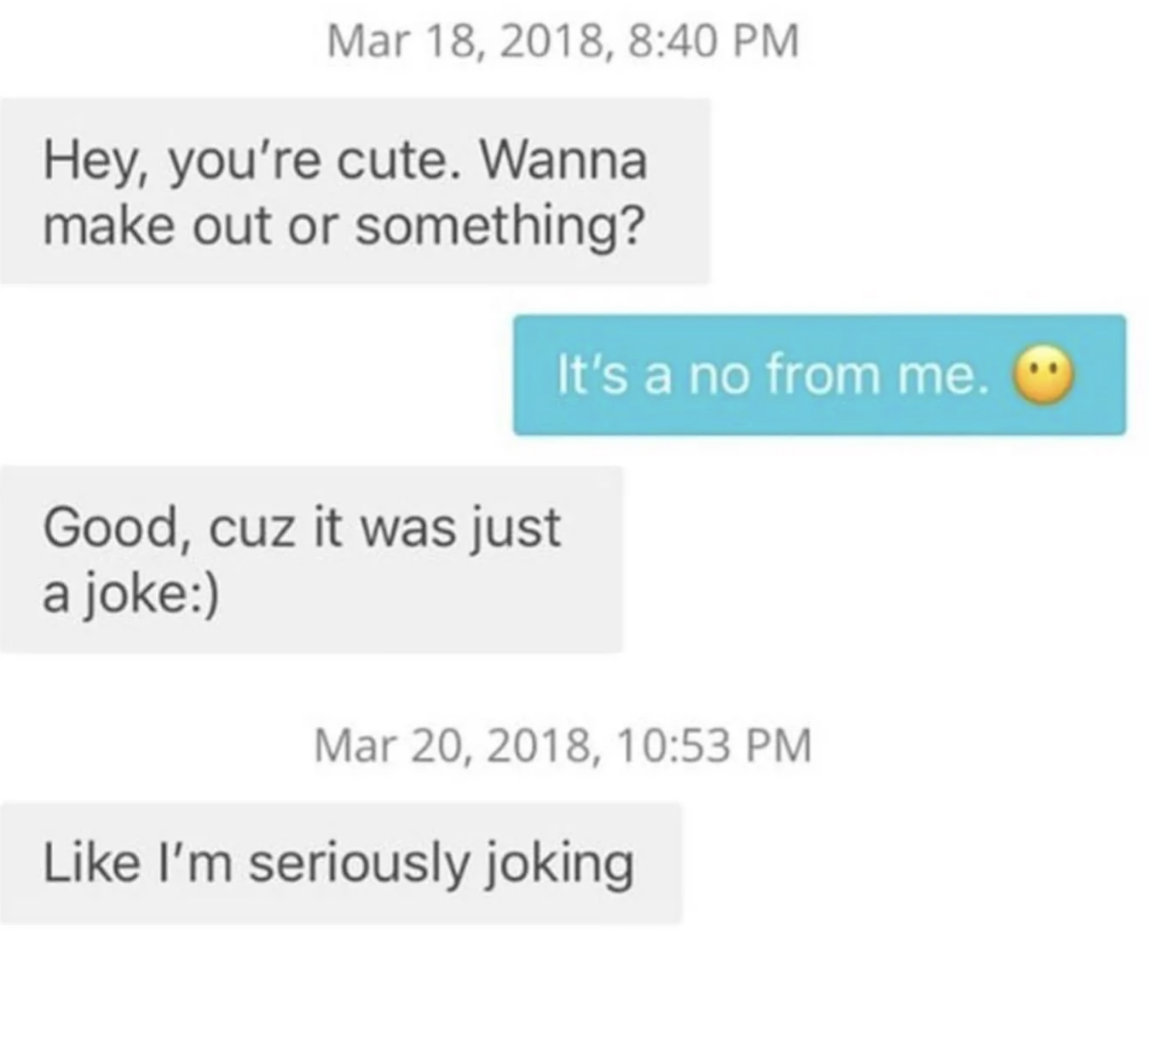 The first person says &quot;you&#x27;re cute, wanna make out?&quot; the second person says no, the first person says it was a joke, then two days later says &quot;like I&#x27;m seriously joking&quot;